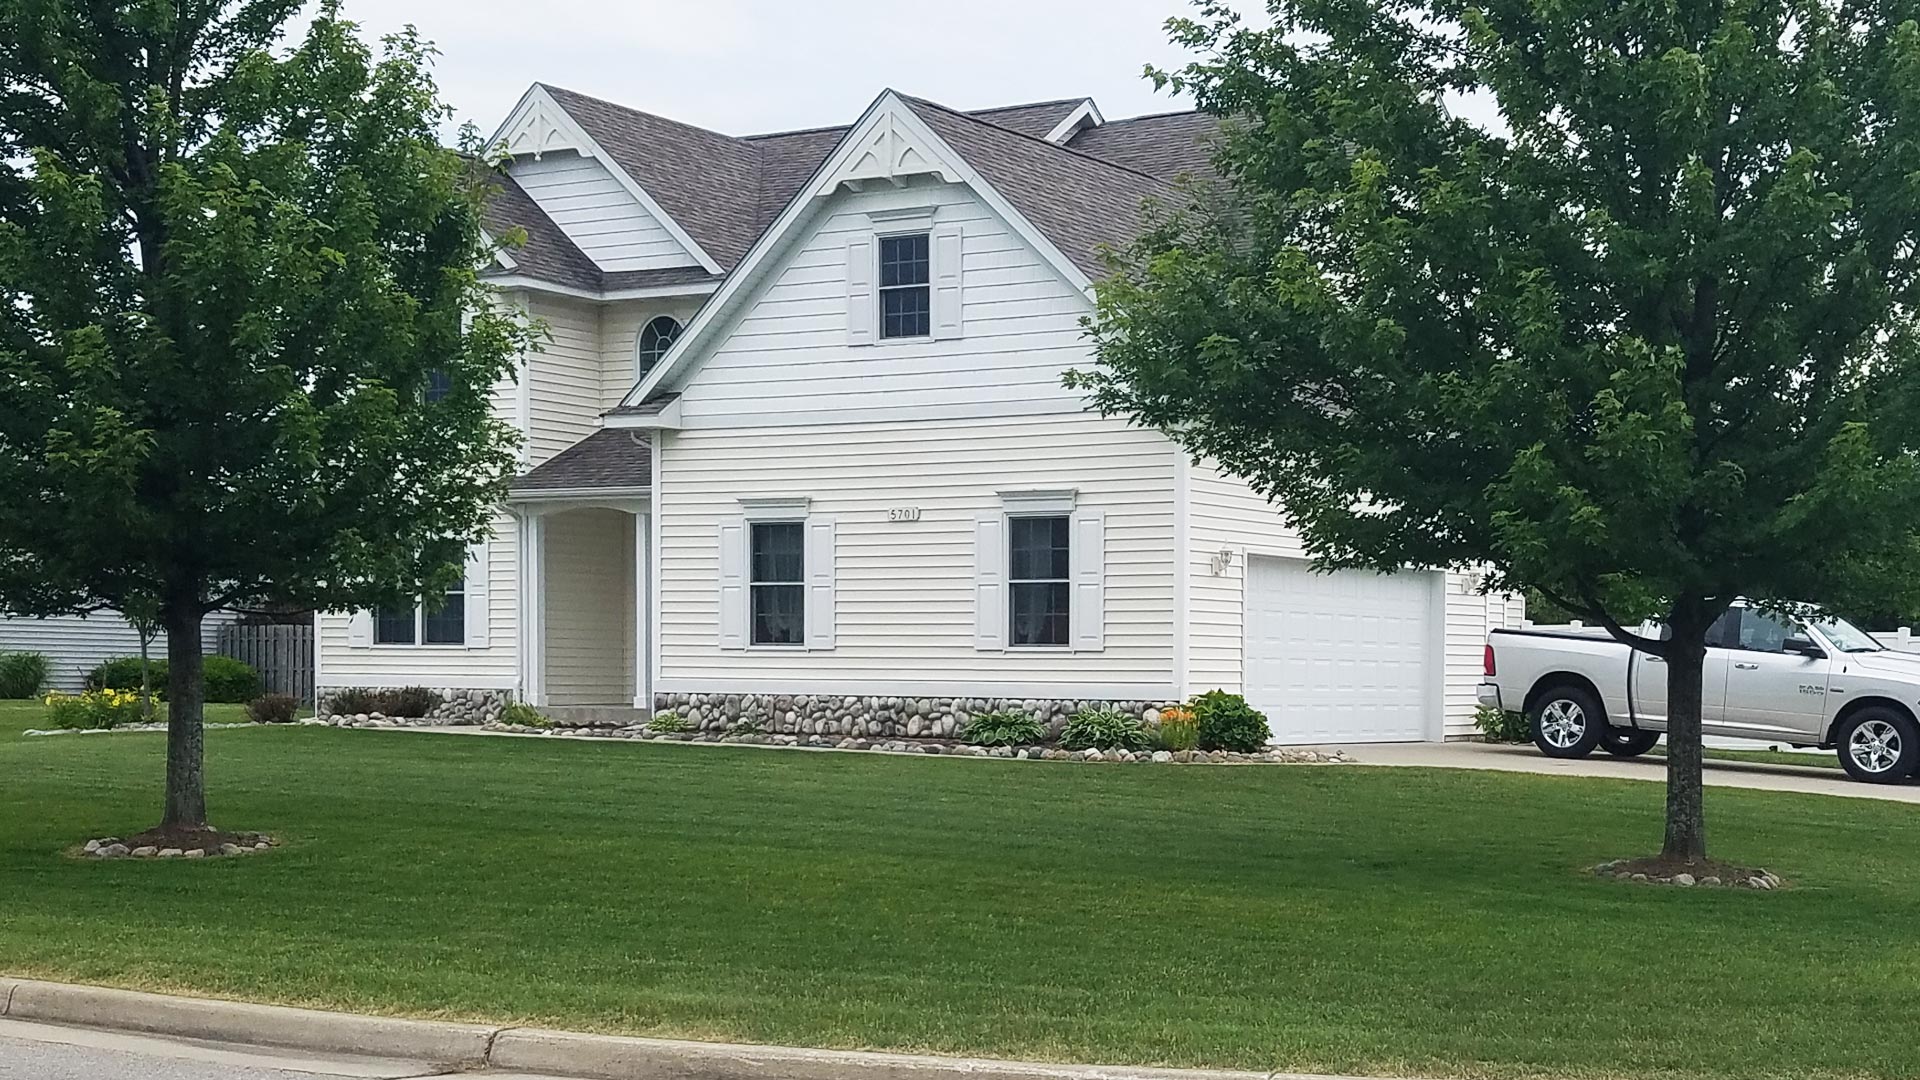 Residential property that was recently mowed by our team in Midland, MI.